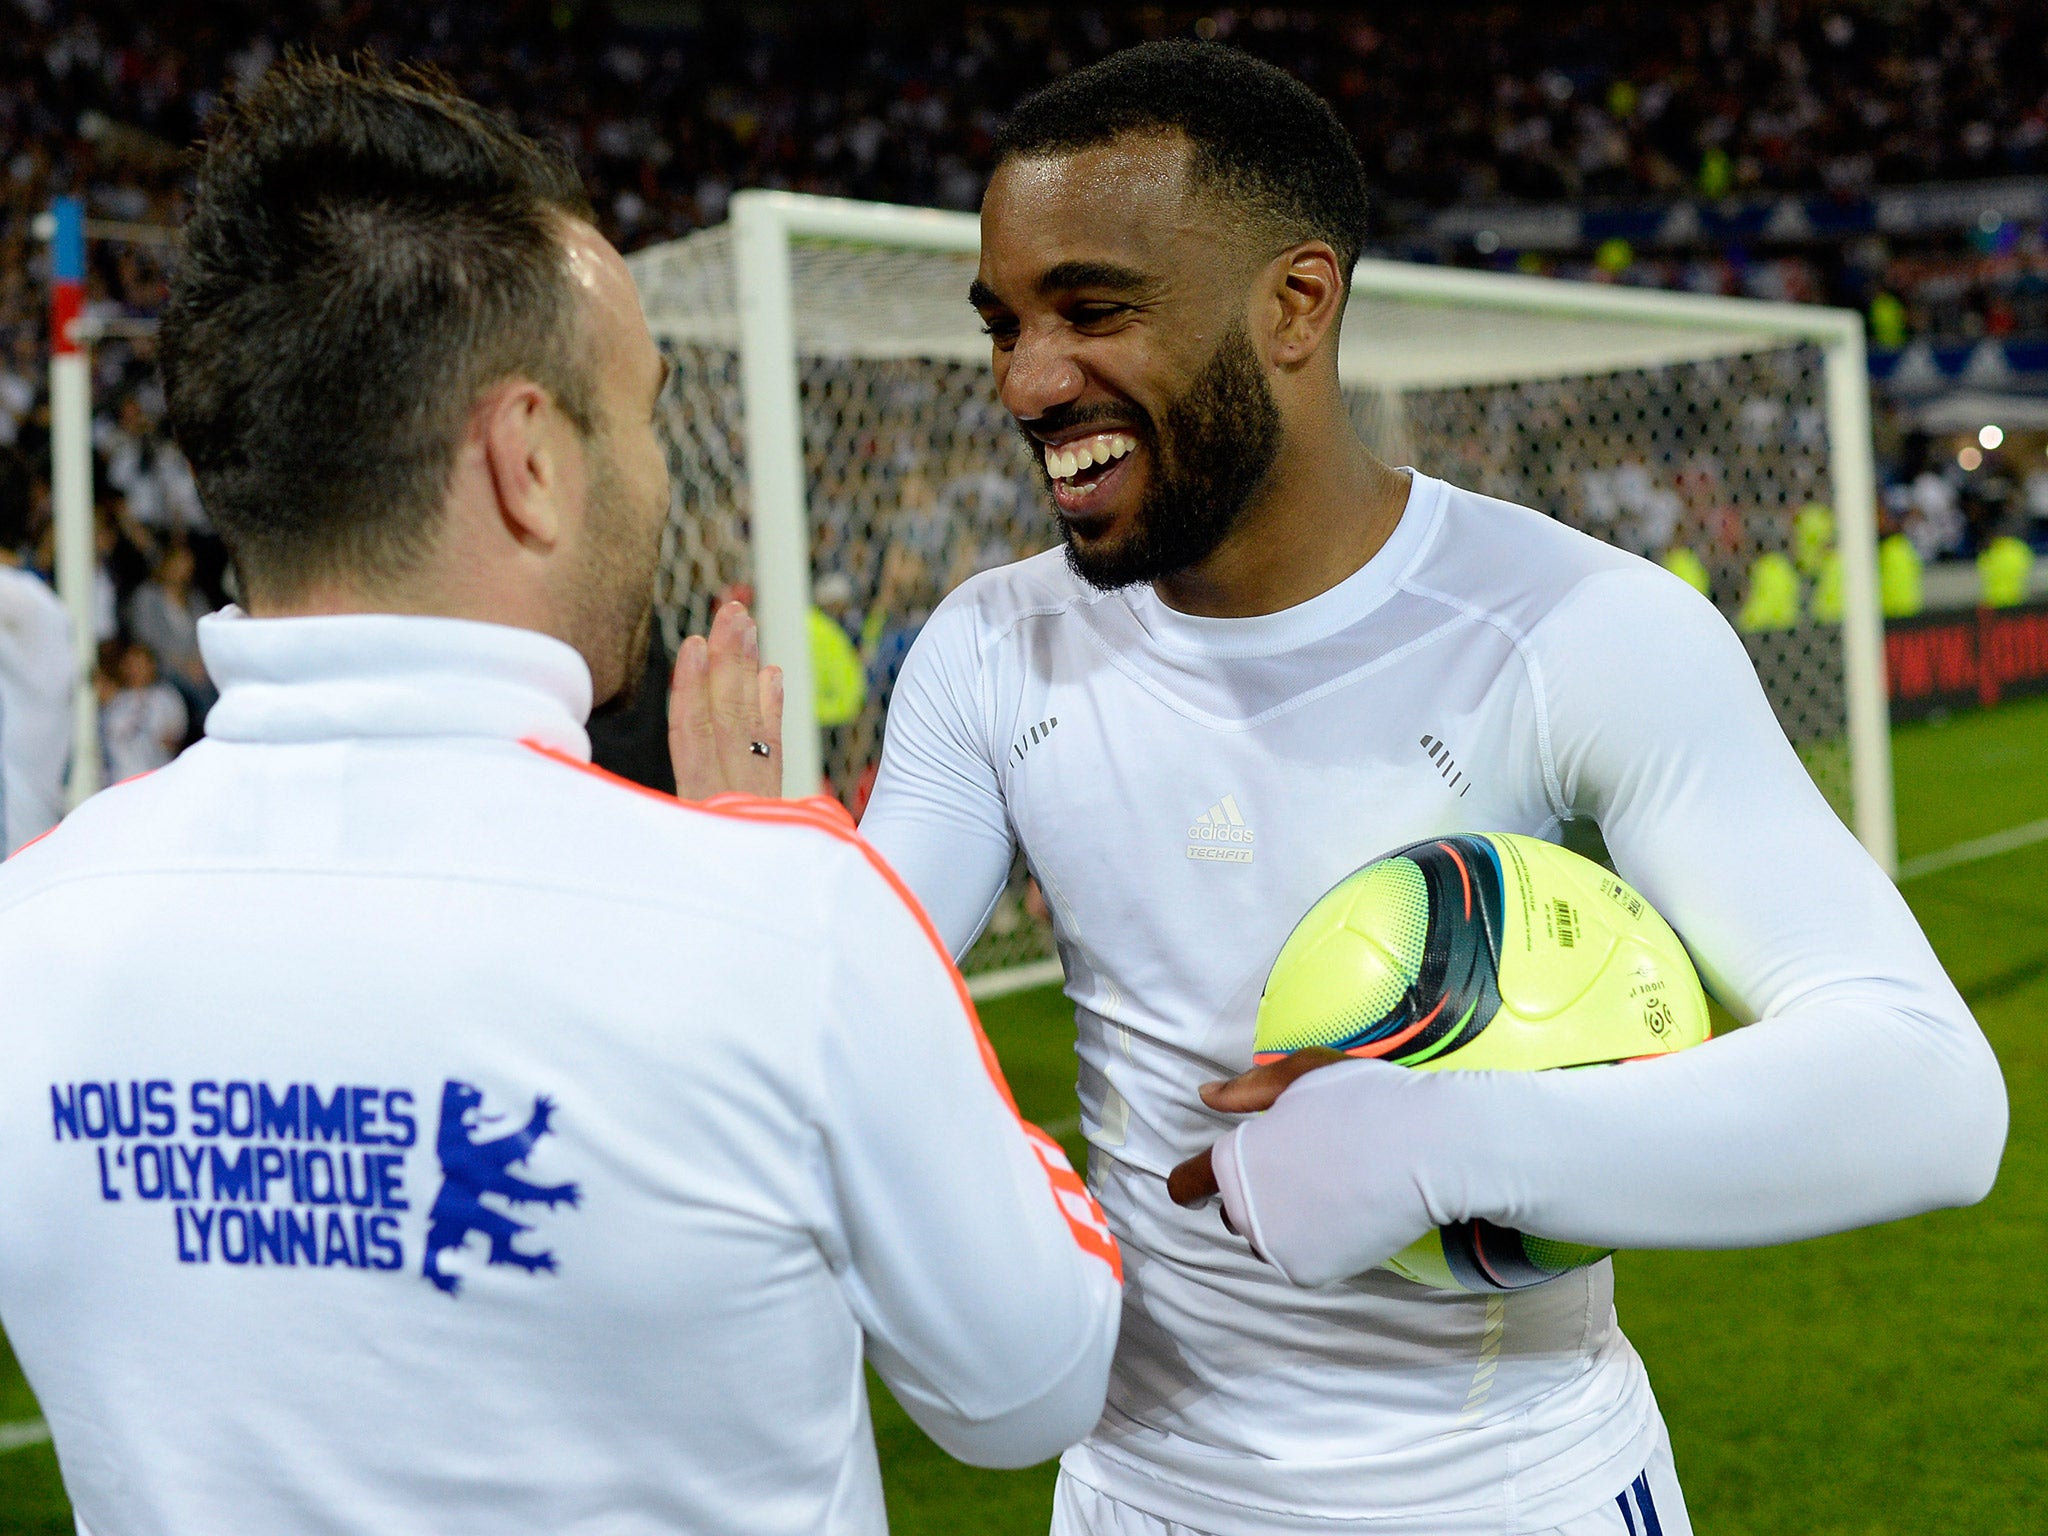 Alexandre Lacazette is being linked with Arsenal despite West Ham making an offer for the Lyon striker